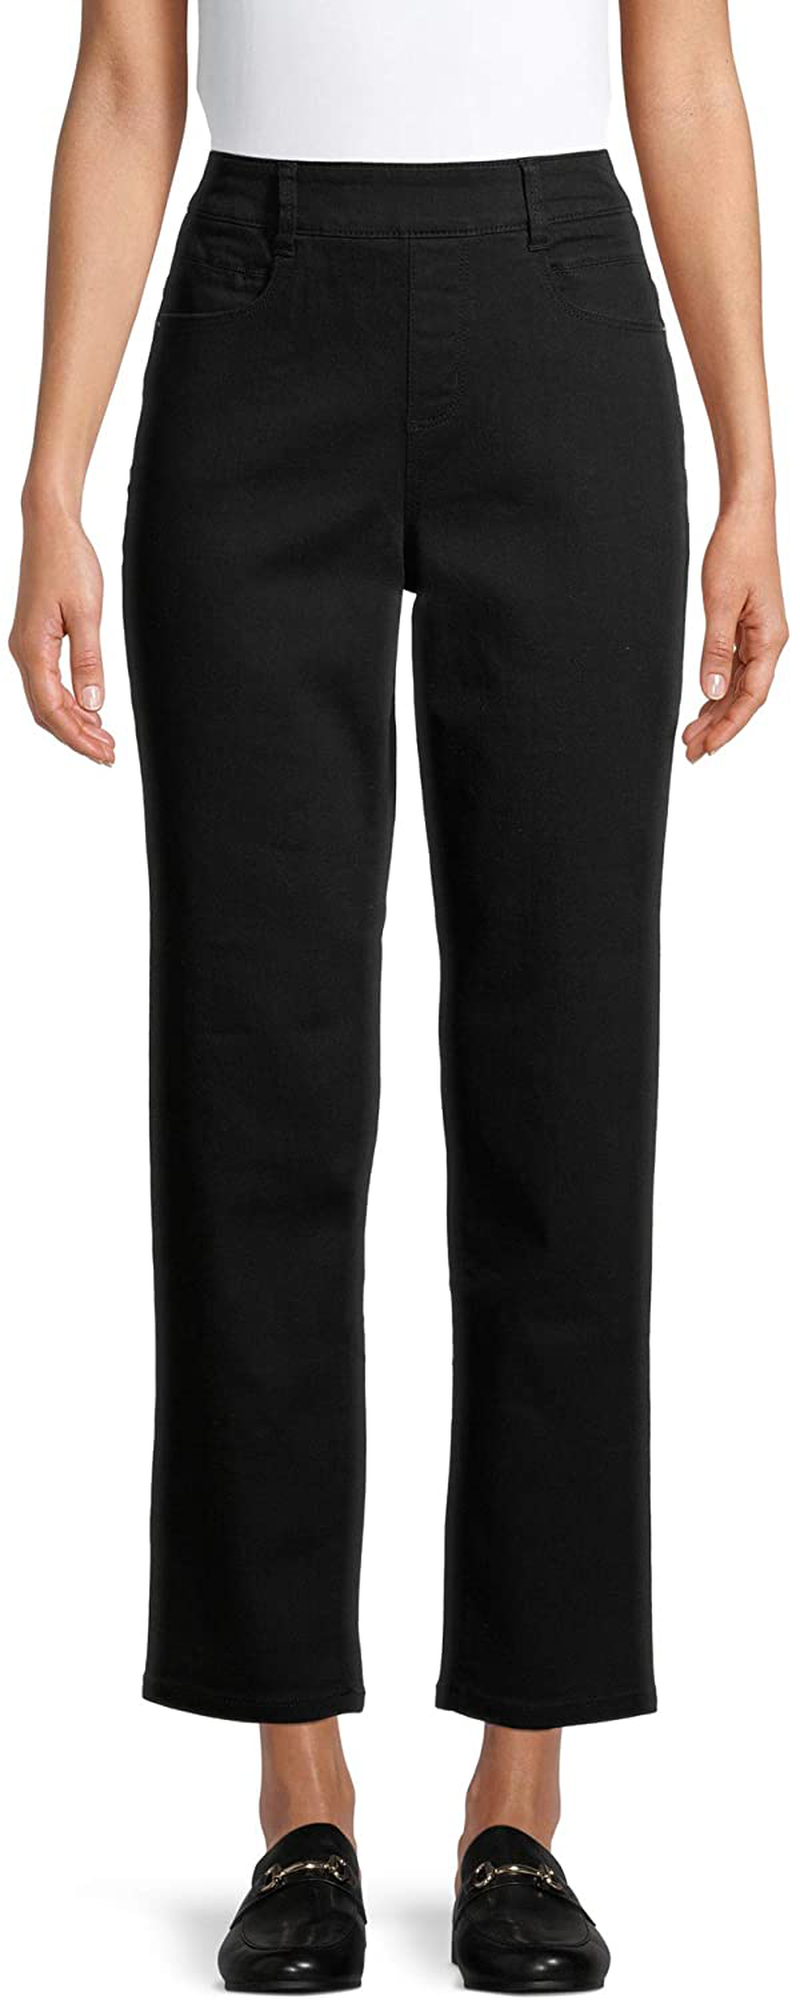 Time & Tru Women's Relaxed Fit 5 Pocket Woven Stretch Pull On Pants